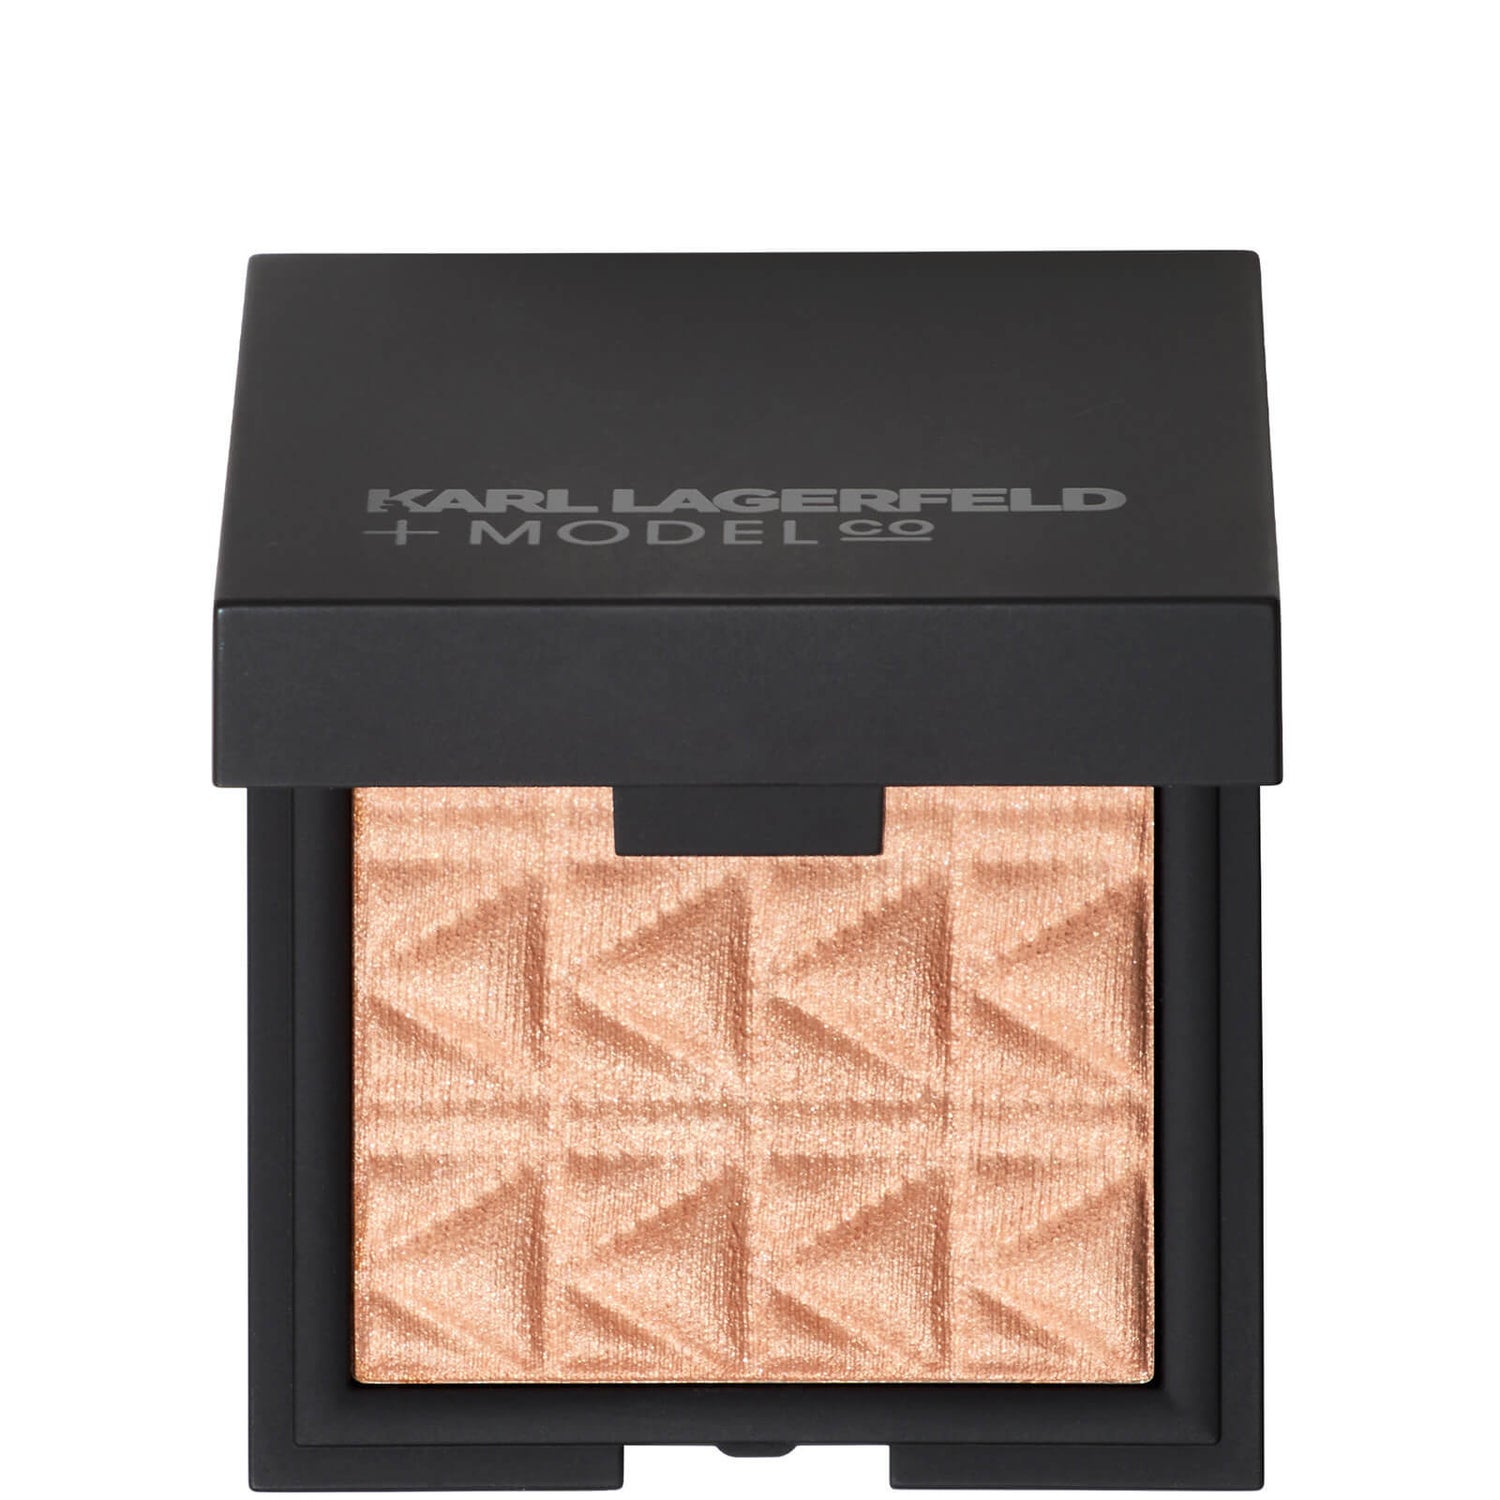 KARL LAGERFELD + MODELCO Luxe Highlight & Glow